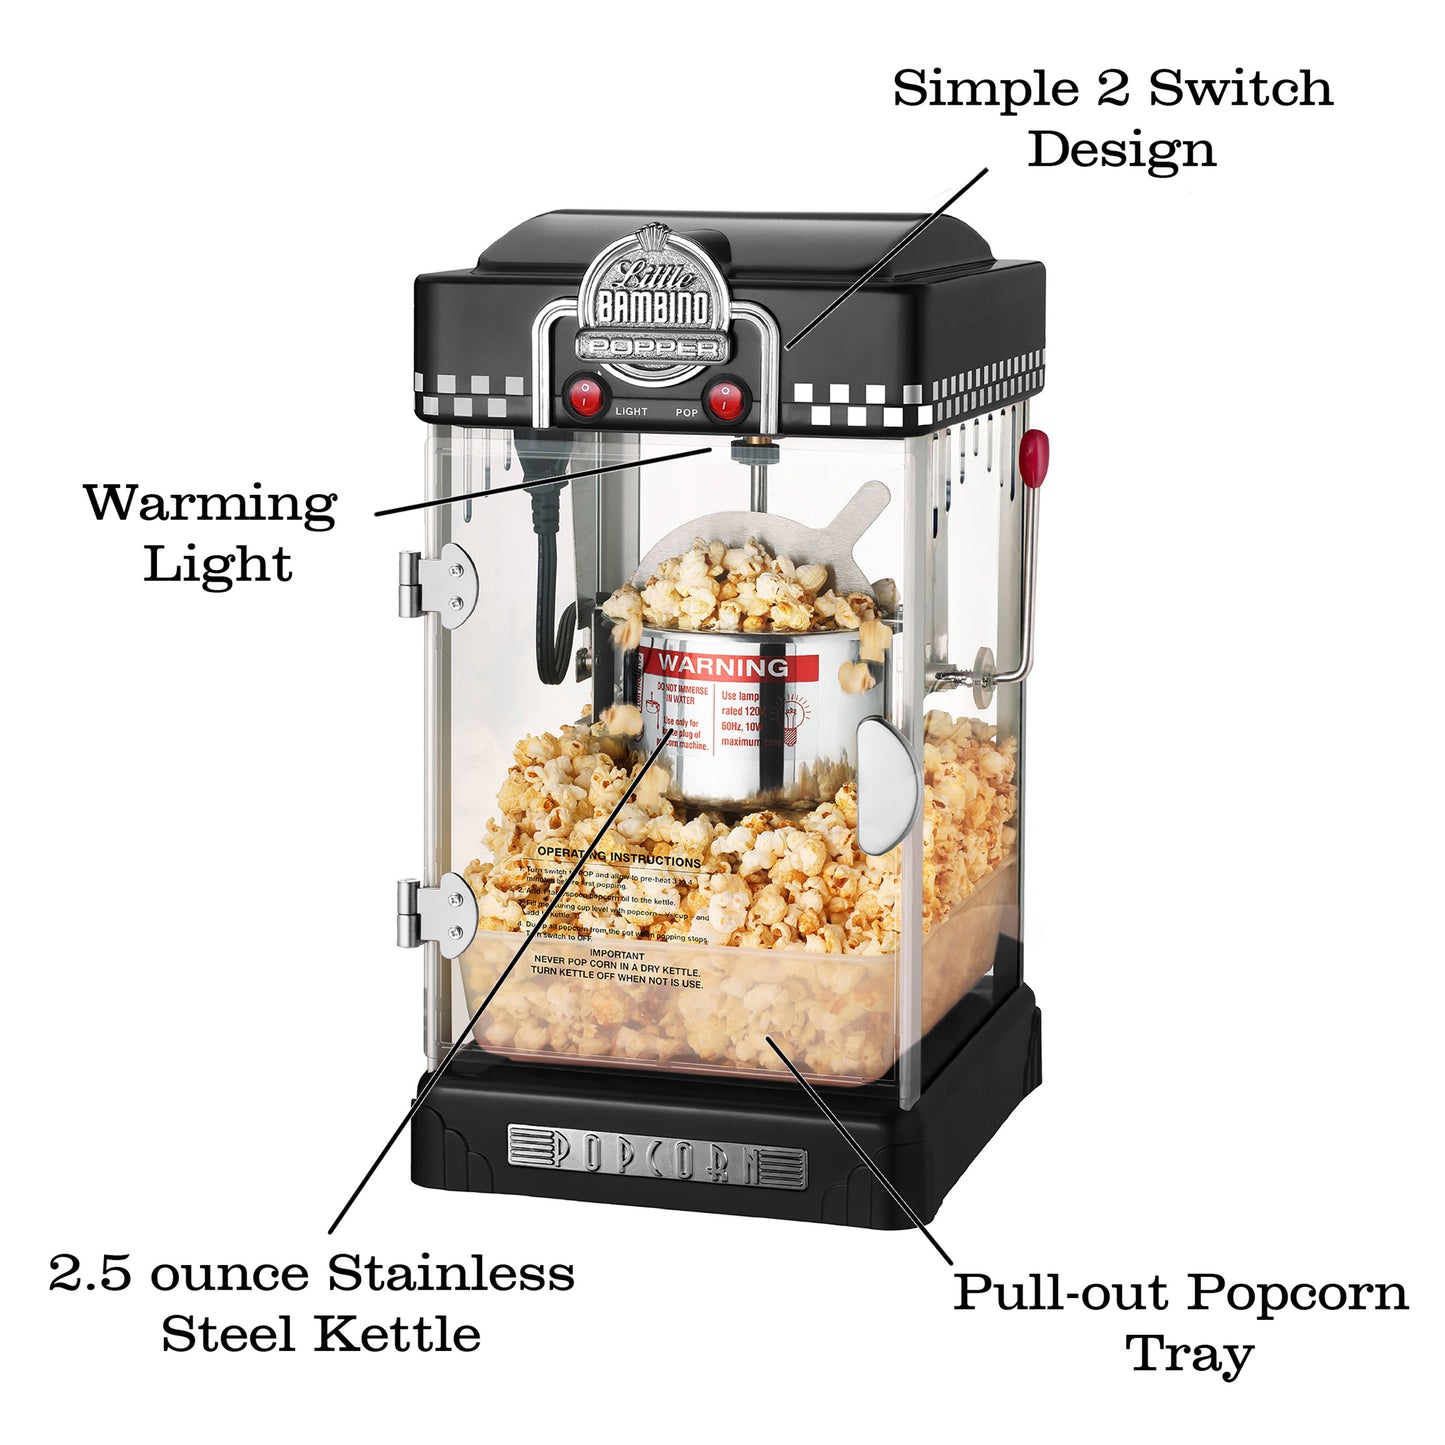 Little Bambino Popcorn Machine with 2.5 Ounce Kettle and 12 Pack of All-In-One Popcorn Kernel Packets - Black